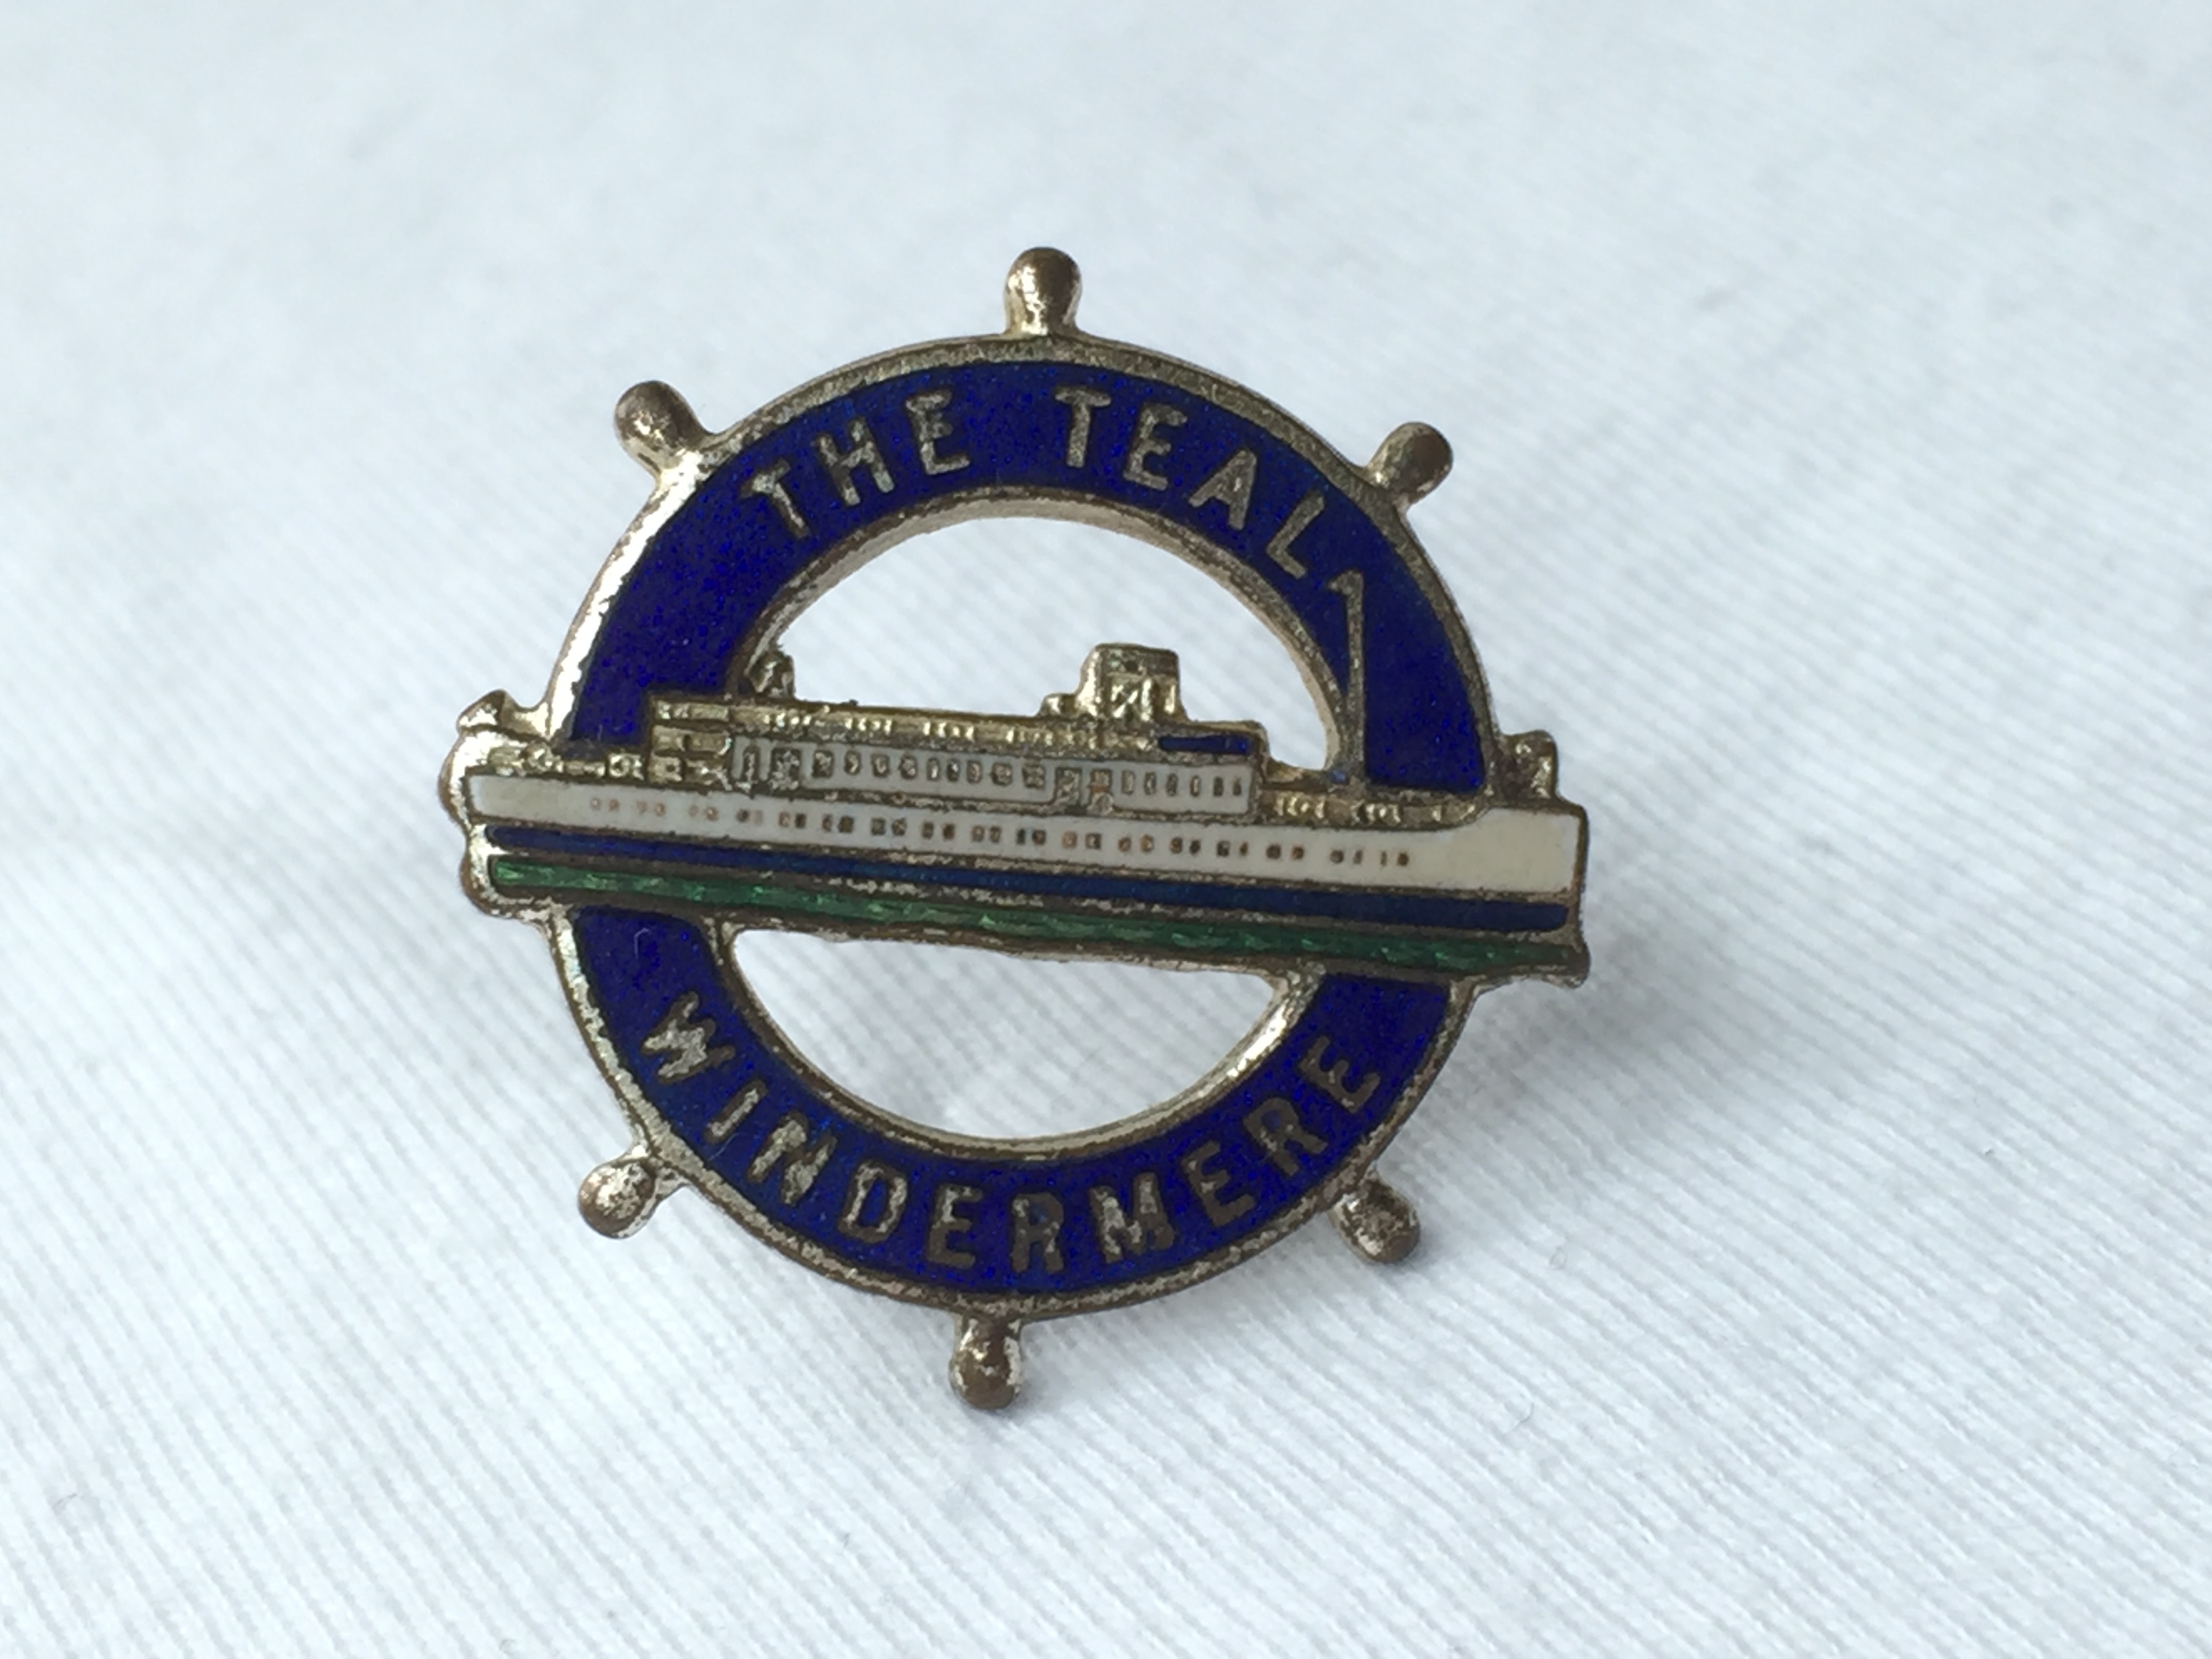 LAPEL PIN BADGE FROM THE WINDERMERE STEAMERS LINE VESSEL THE TEAL